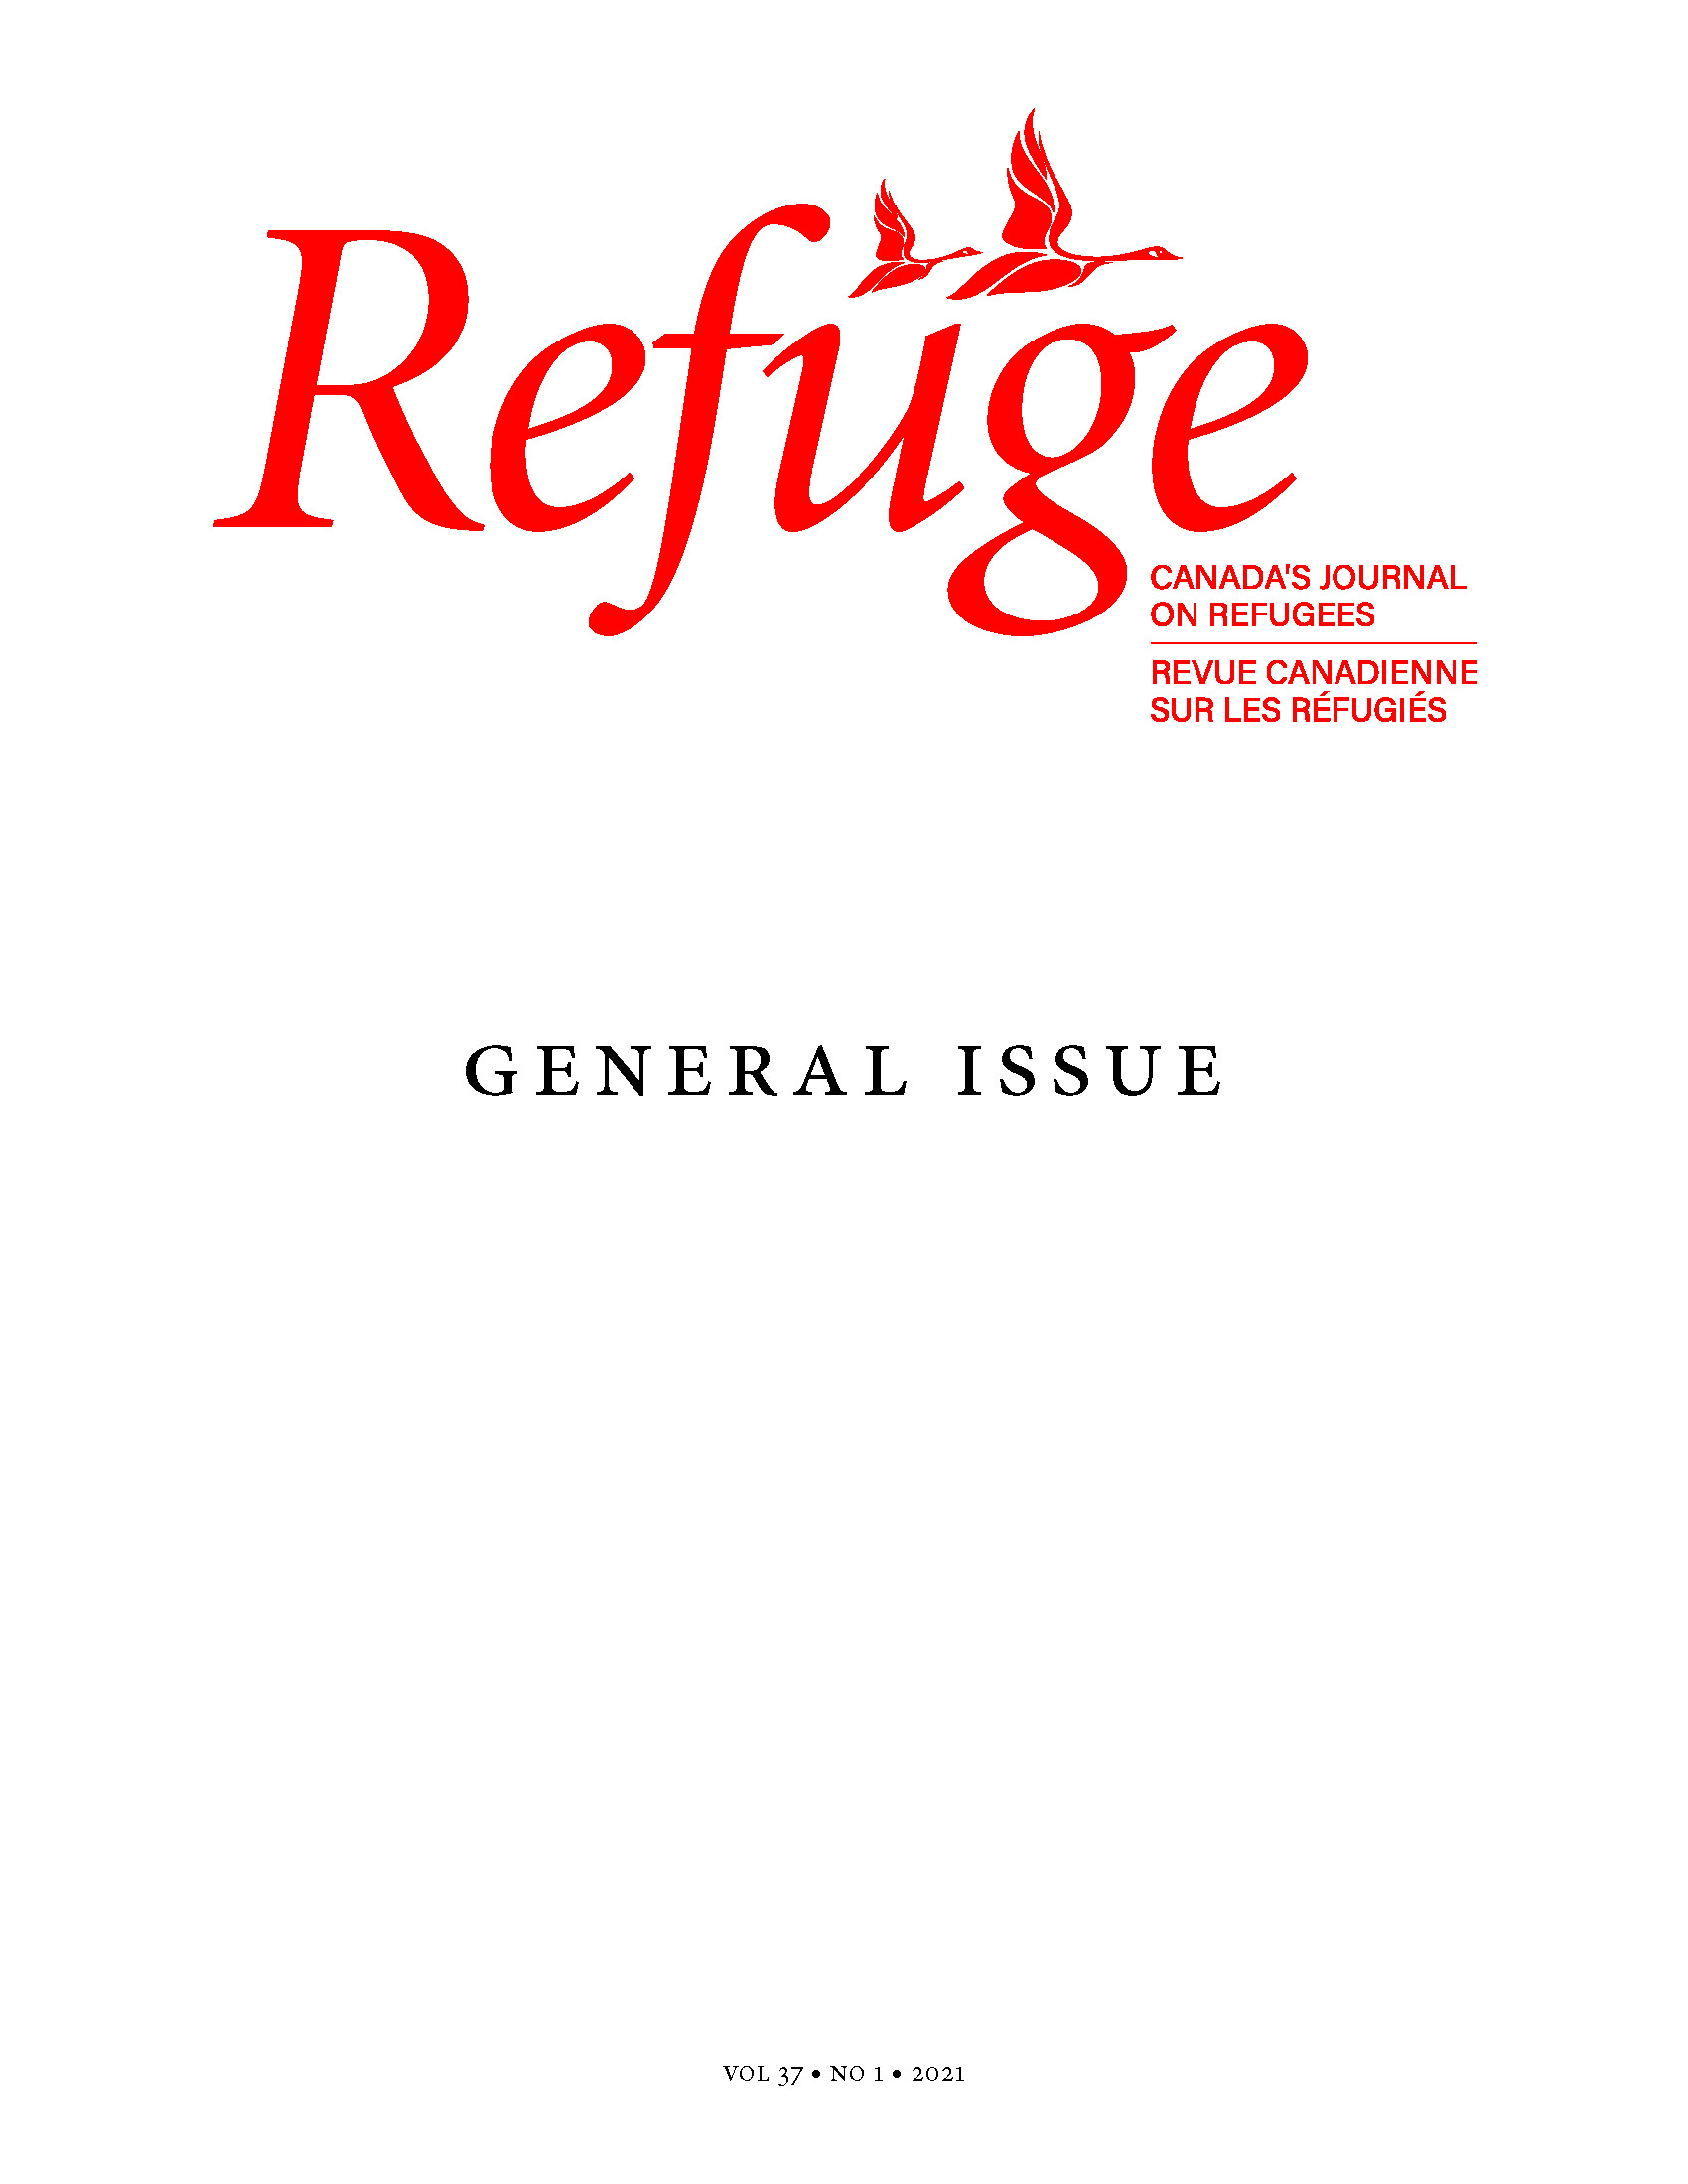 cover of Refuge 37.1 general issue